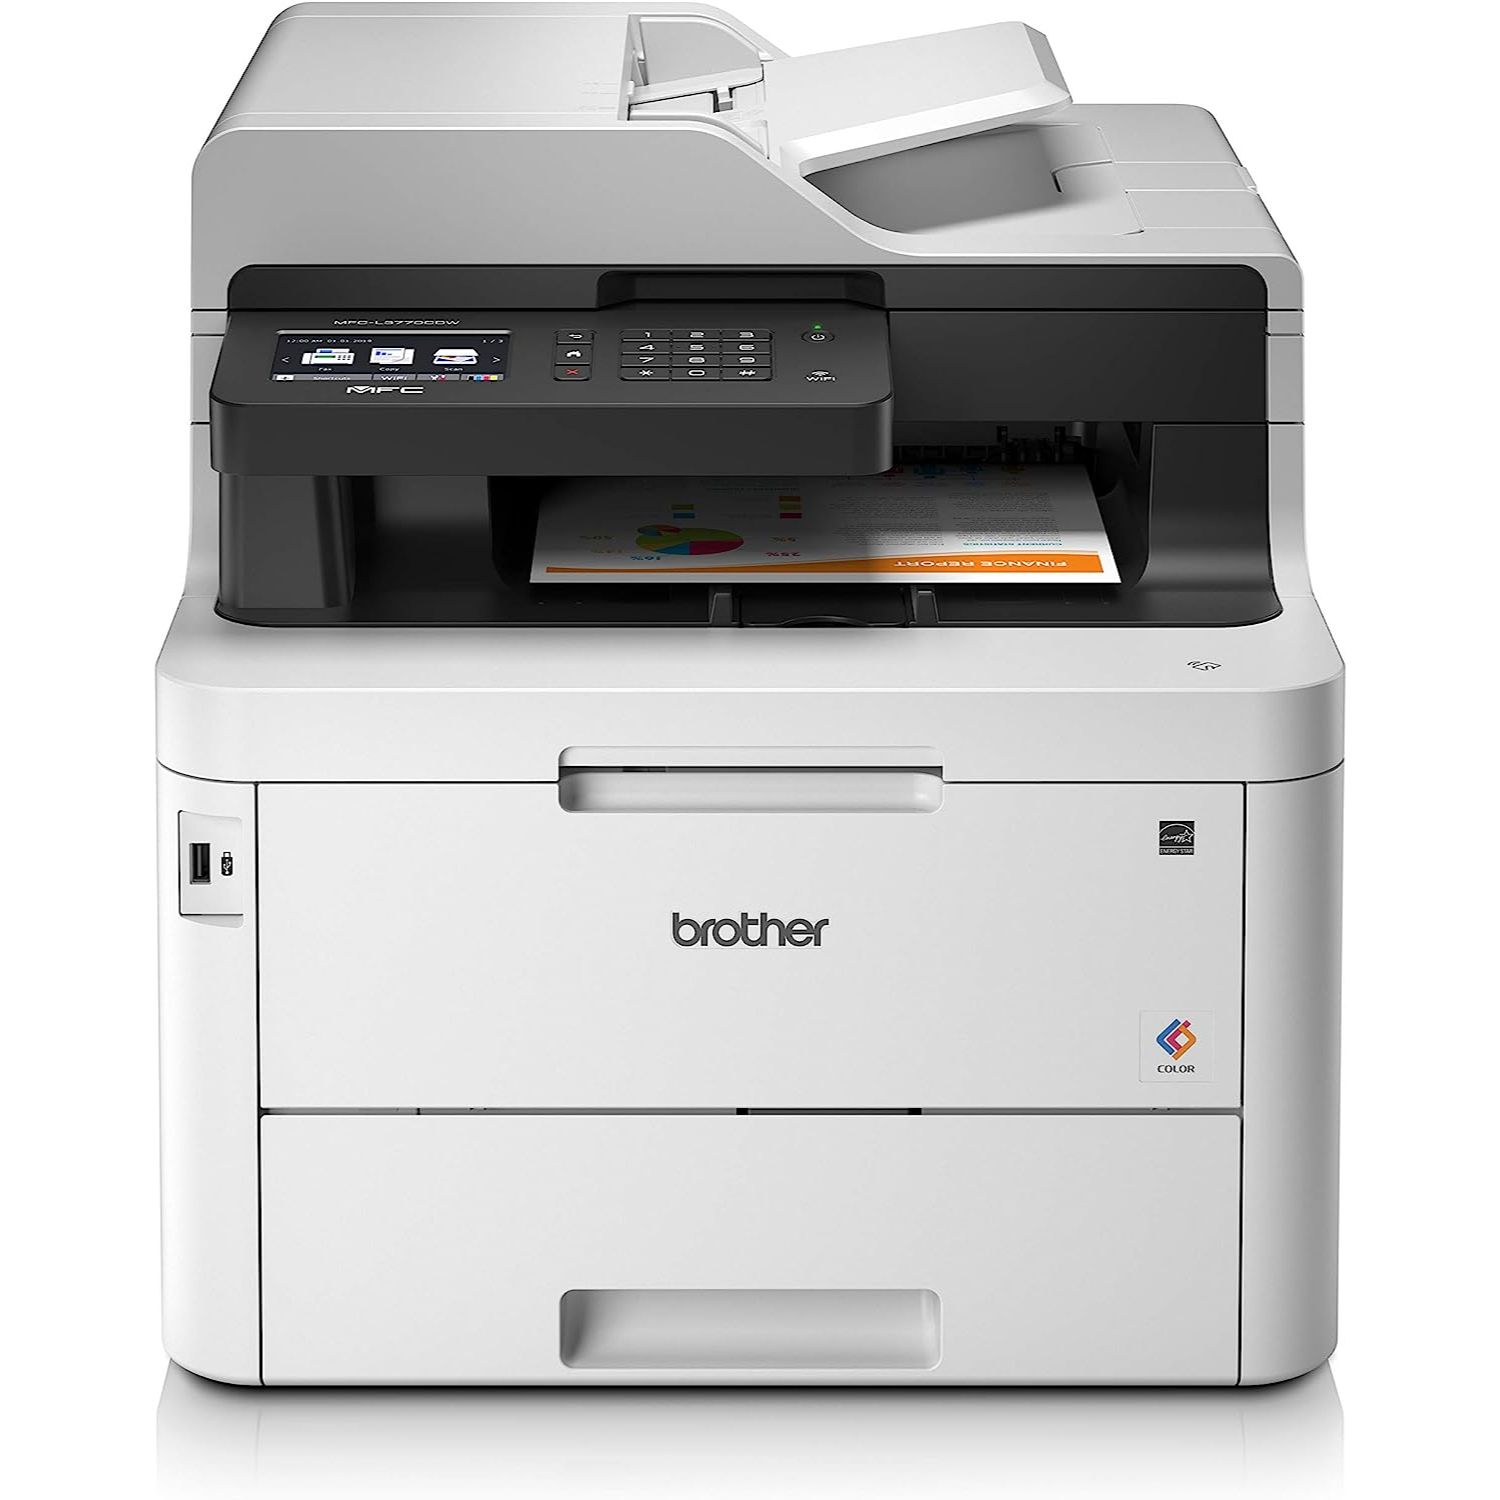 Brother MFC-L3770CDW 4 in 1 Colour Laser Printer